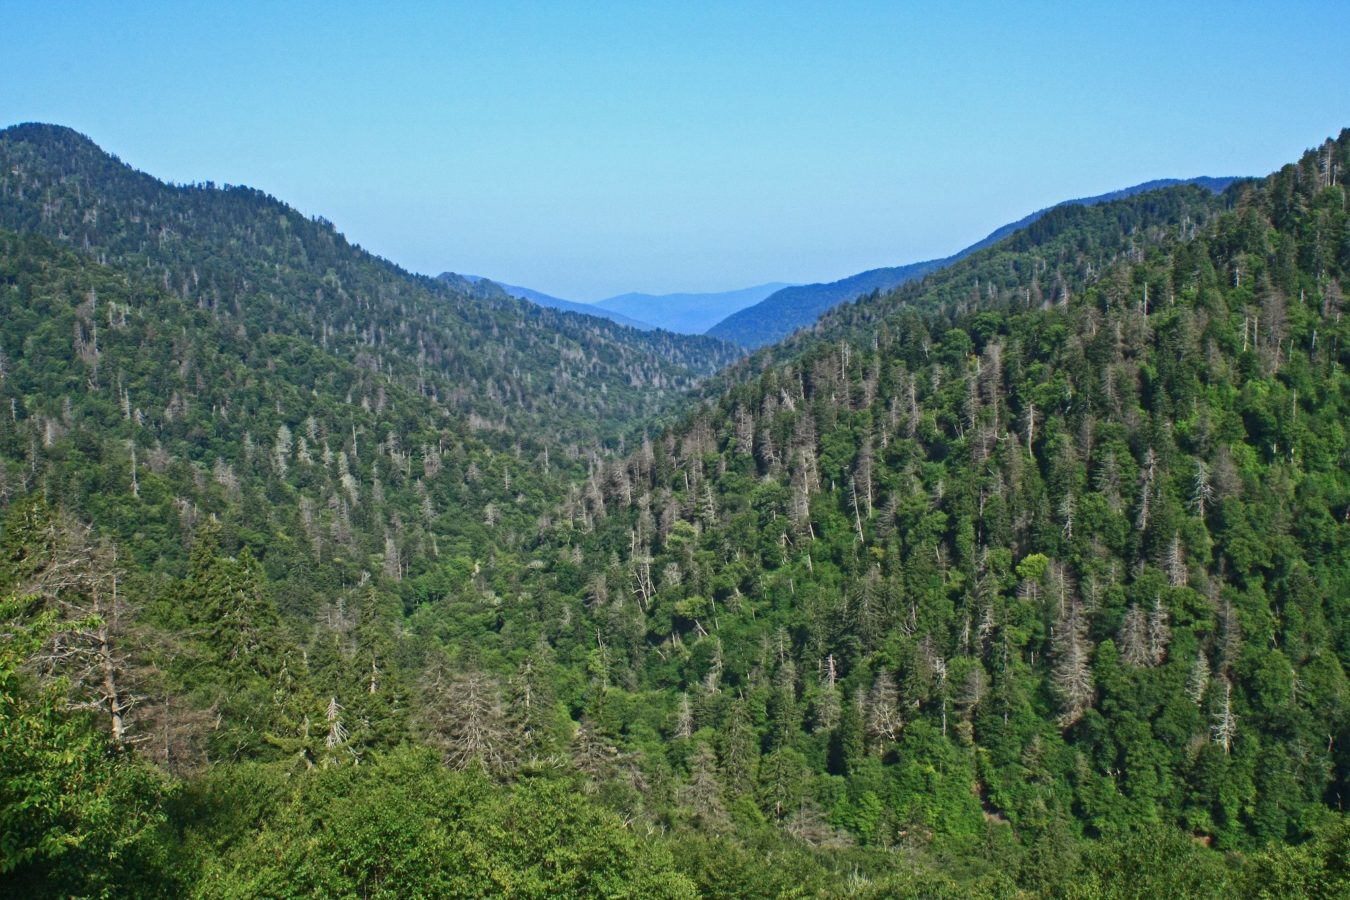 USA: Great Smoky Mountains National Park. Trees being killed by hemlock woolly adelgid (Adelges tsugae)